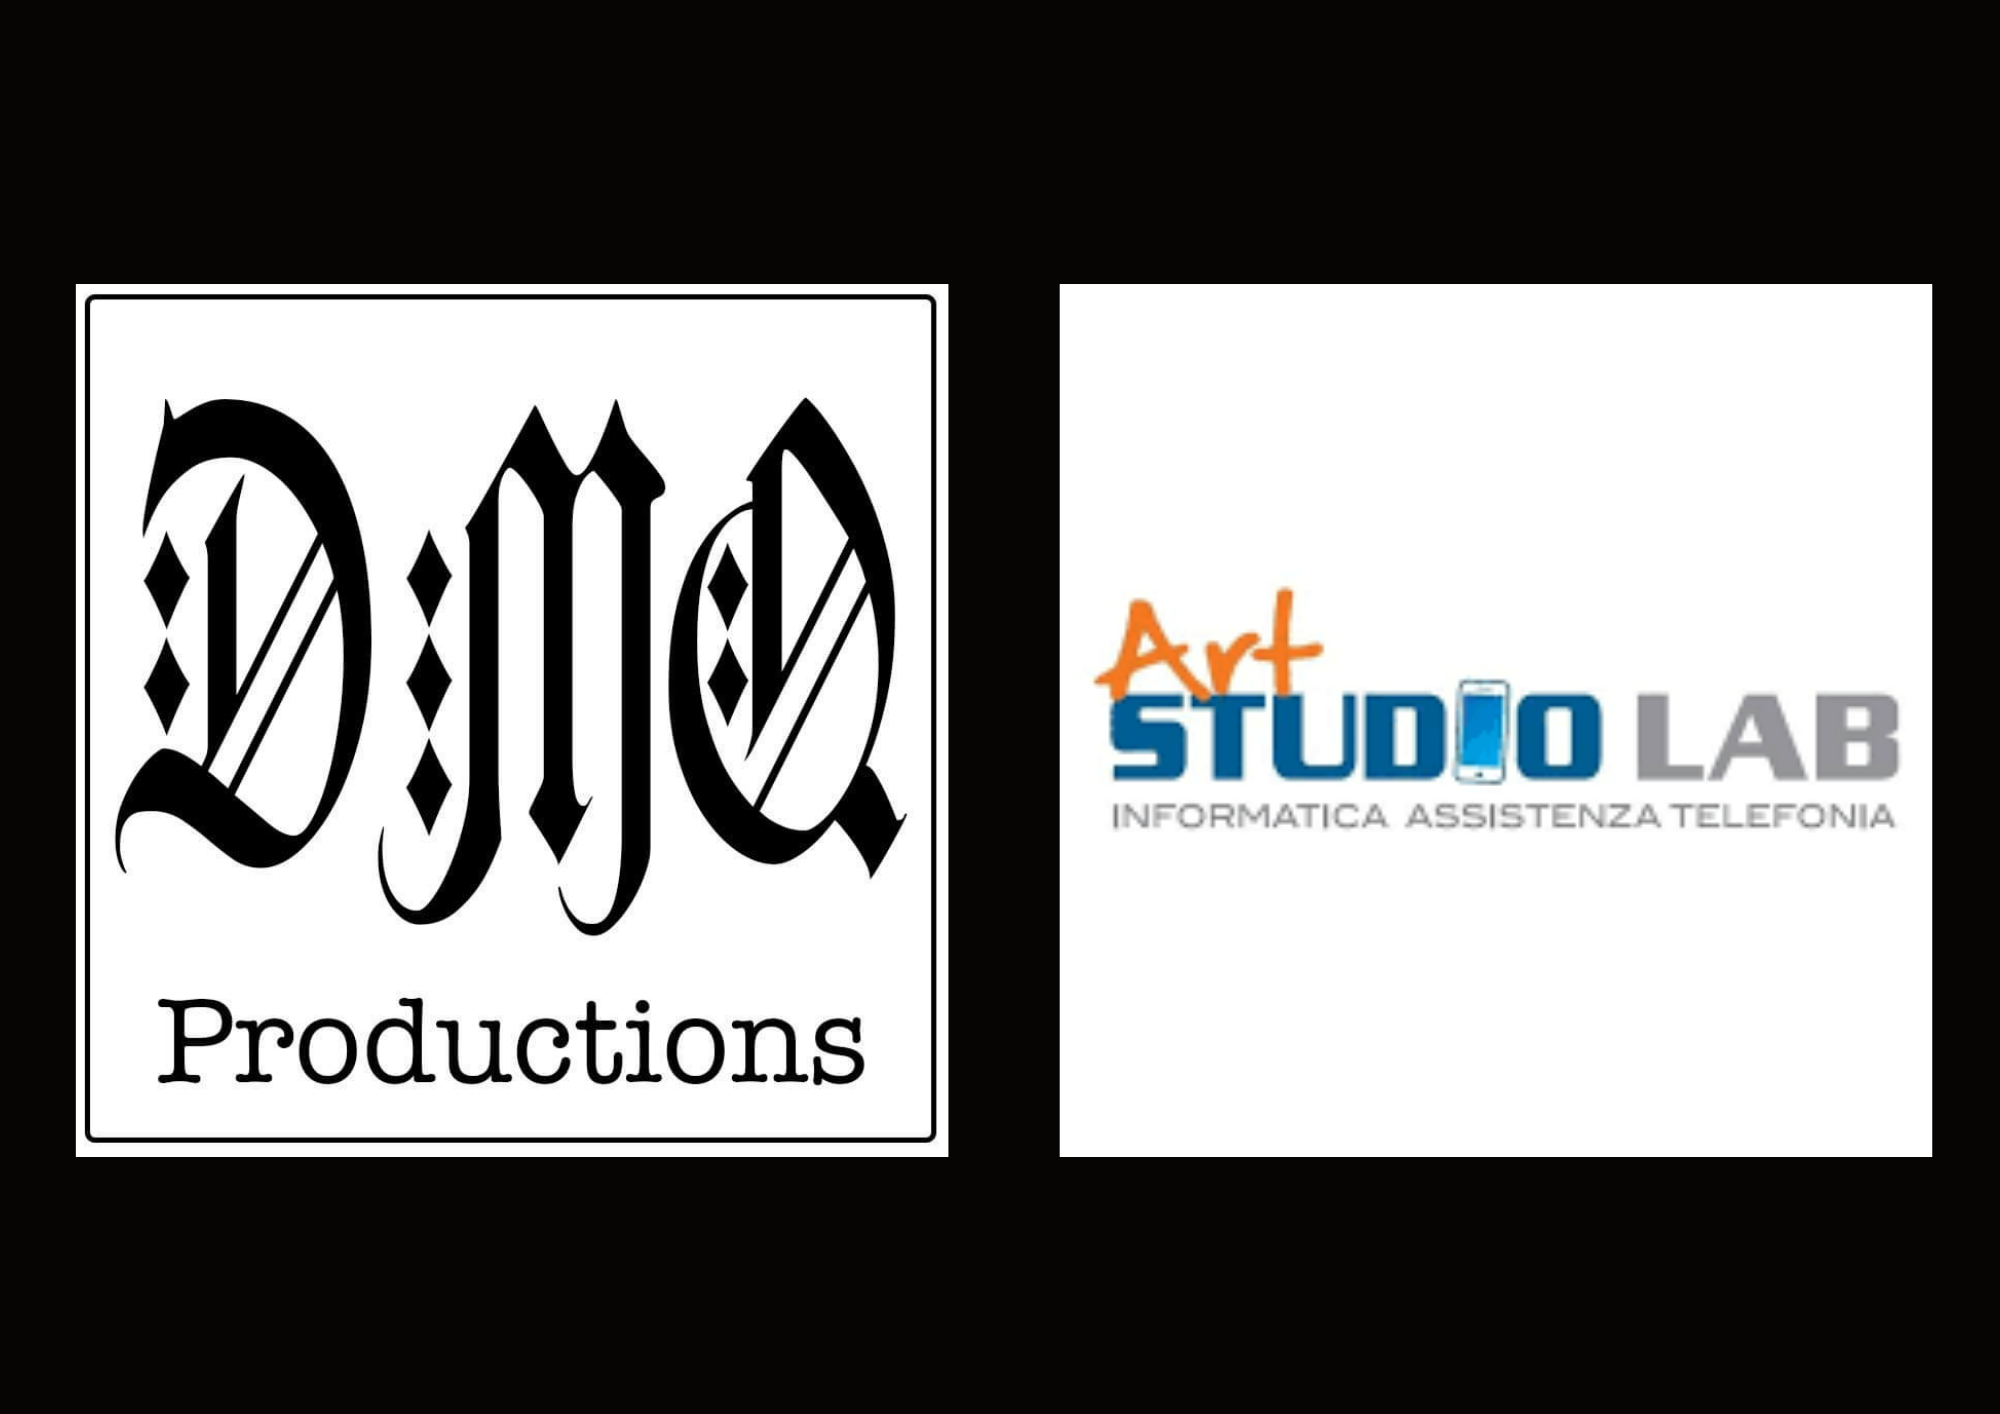 DMQ Producions and Artstudiolab are Flyingstories main partners.